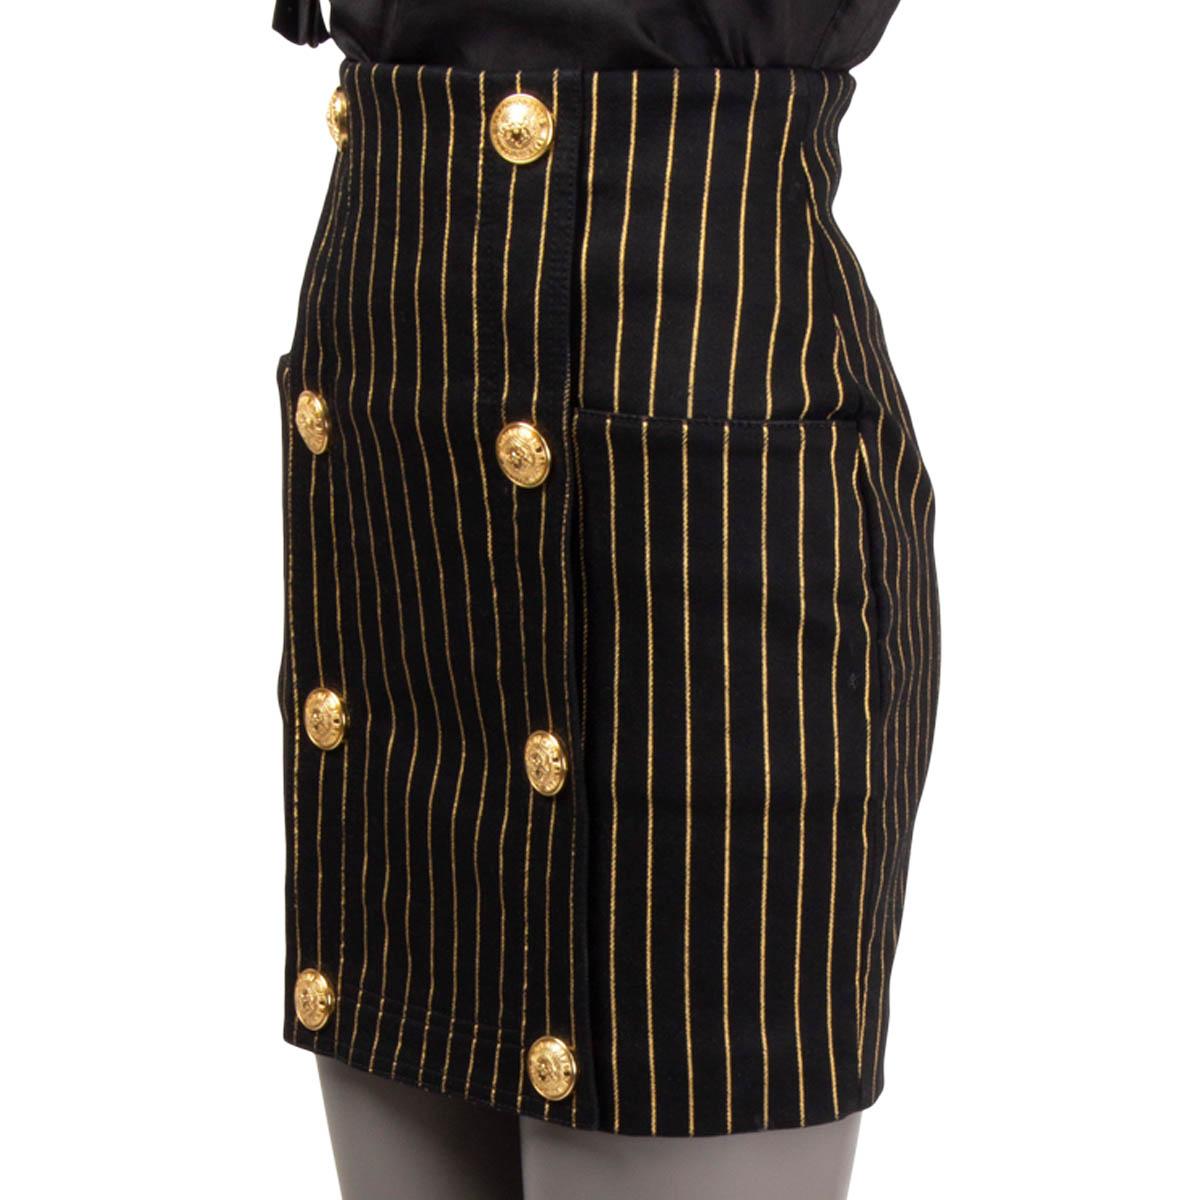 BALMAIN black & gold STRIPED BUTTONED HIGH WAISTED MINI Skirt 36 XS In Excellent Condition For Sale In Zürich, CH